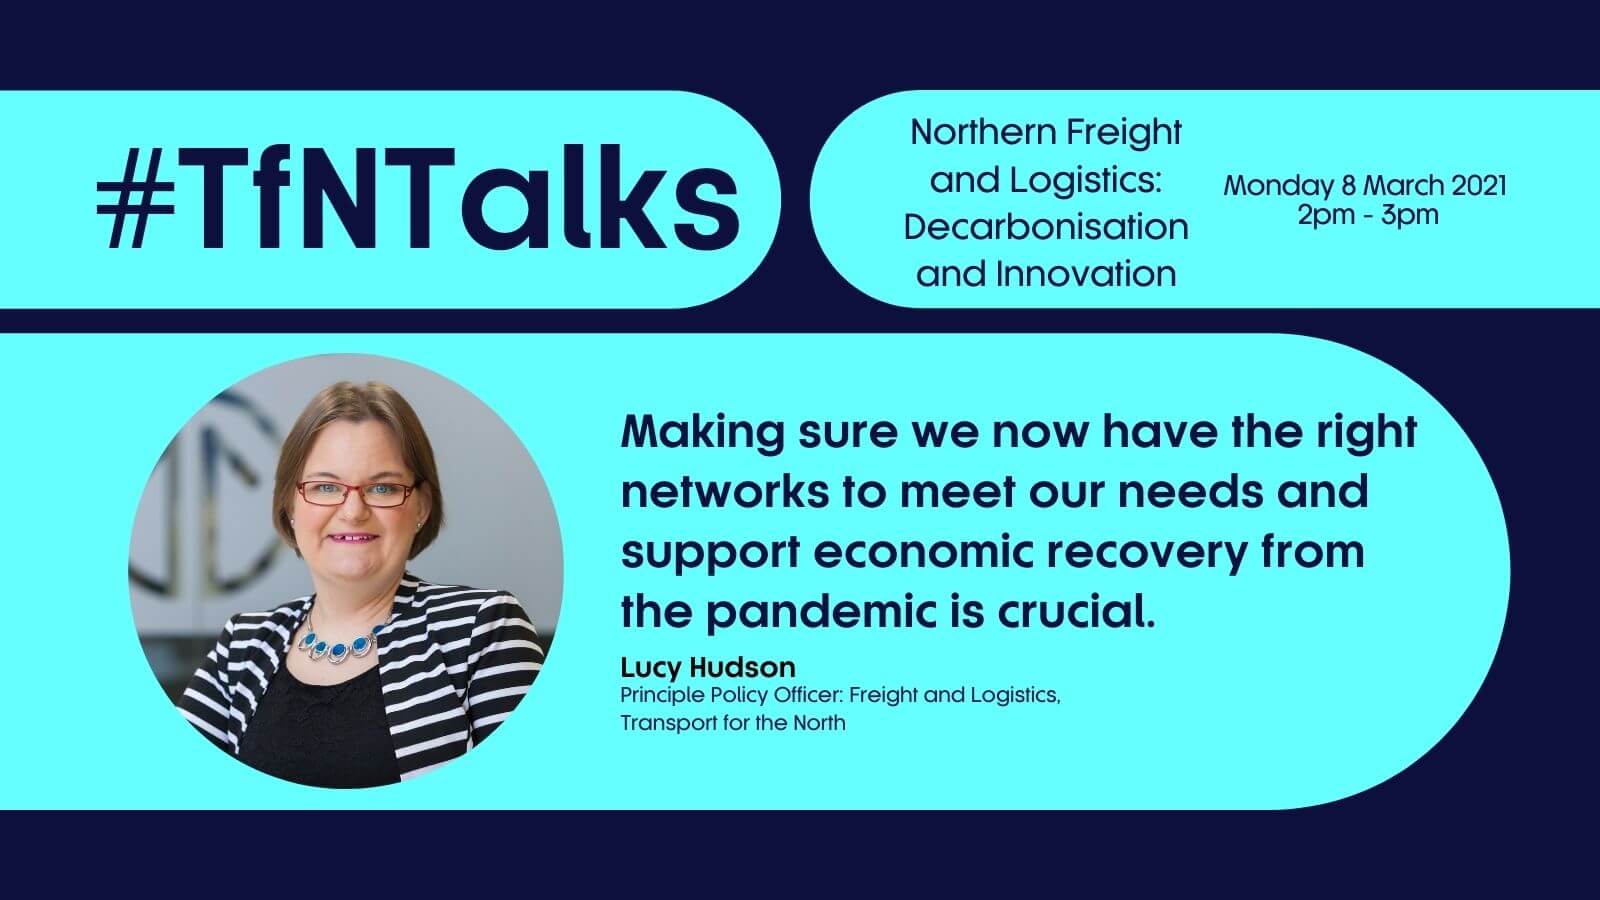 Lucy Hudson Principle Policy Officer: Freight and Logistics, Transport for the North